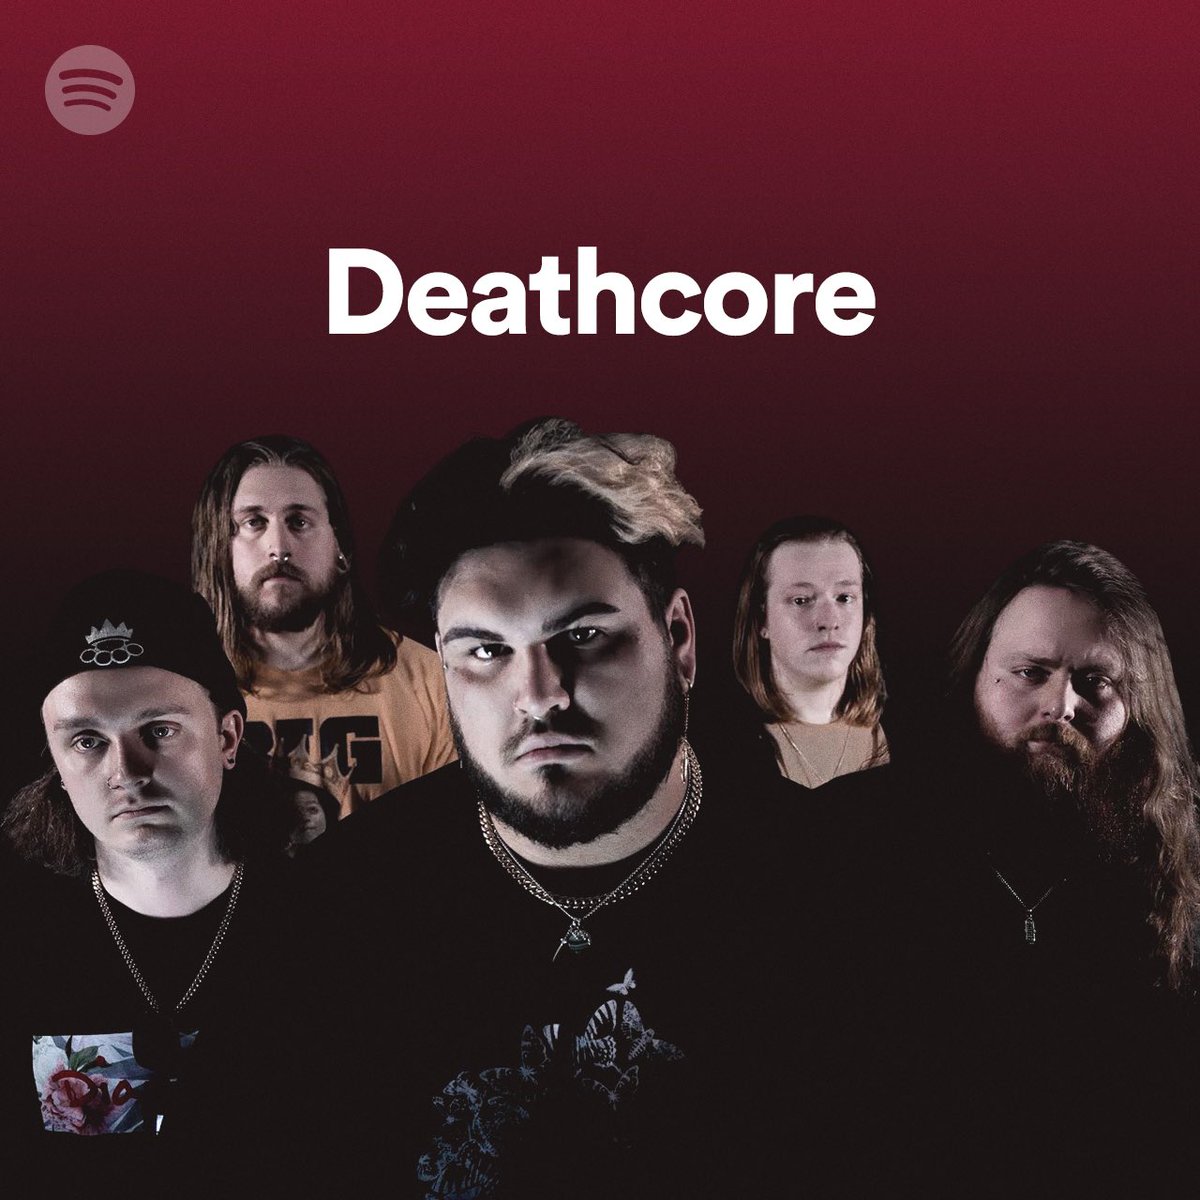 Stoked we’re 2 for 2 on the @Spotify Deathcore playlist—both times with homies. Last time was @BrandOSacrifice holding it down, now @LeftToSuffer are the face of the genre. Imagine we got if we got on the cover some day. Just kidding, unless... 👀